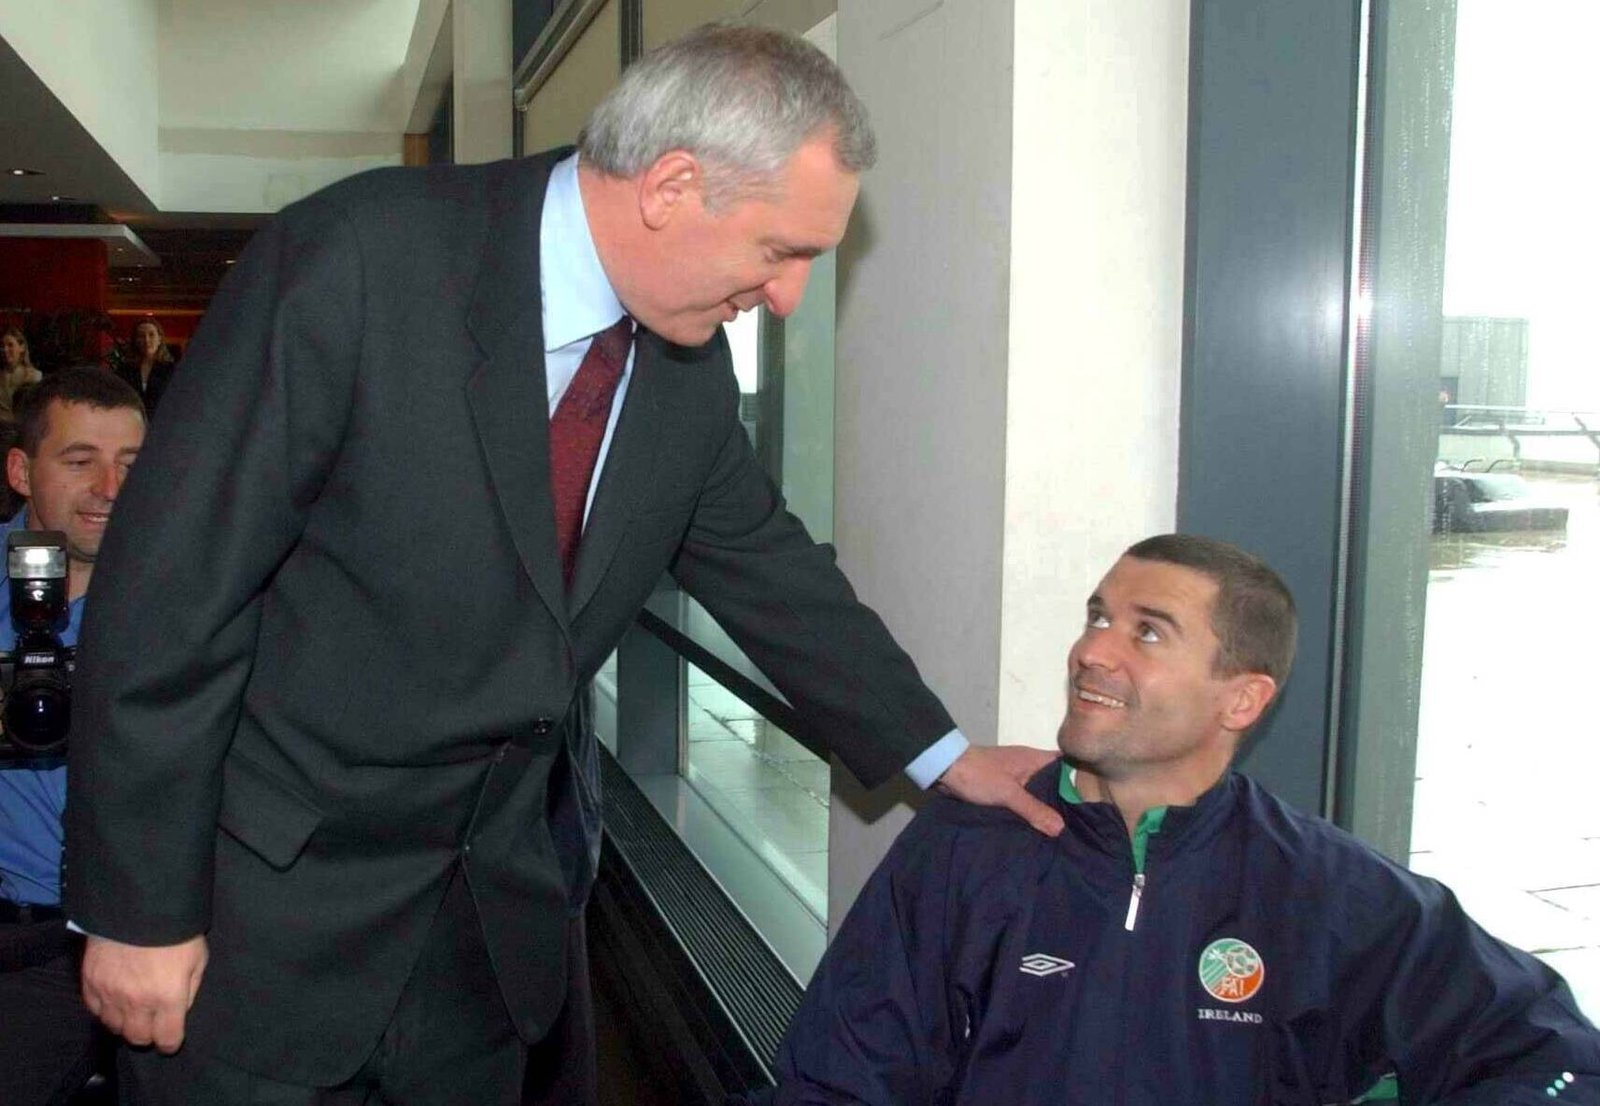 Image - Roy Keane meets Taoiseach Bertie Ahern at Dublin Airport, where there were no seats for the players as they waited to board plane